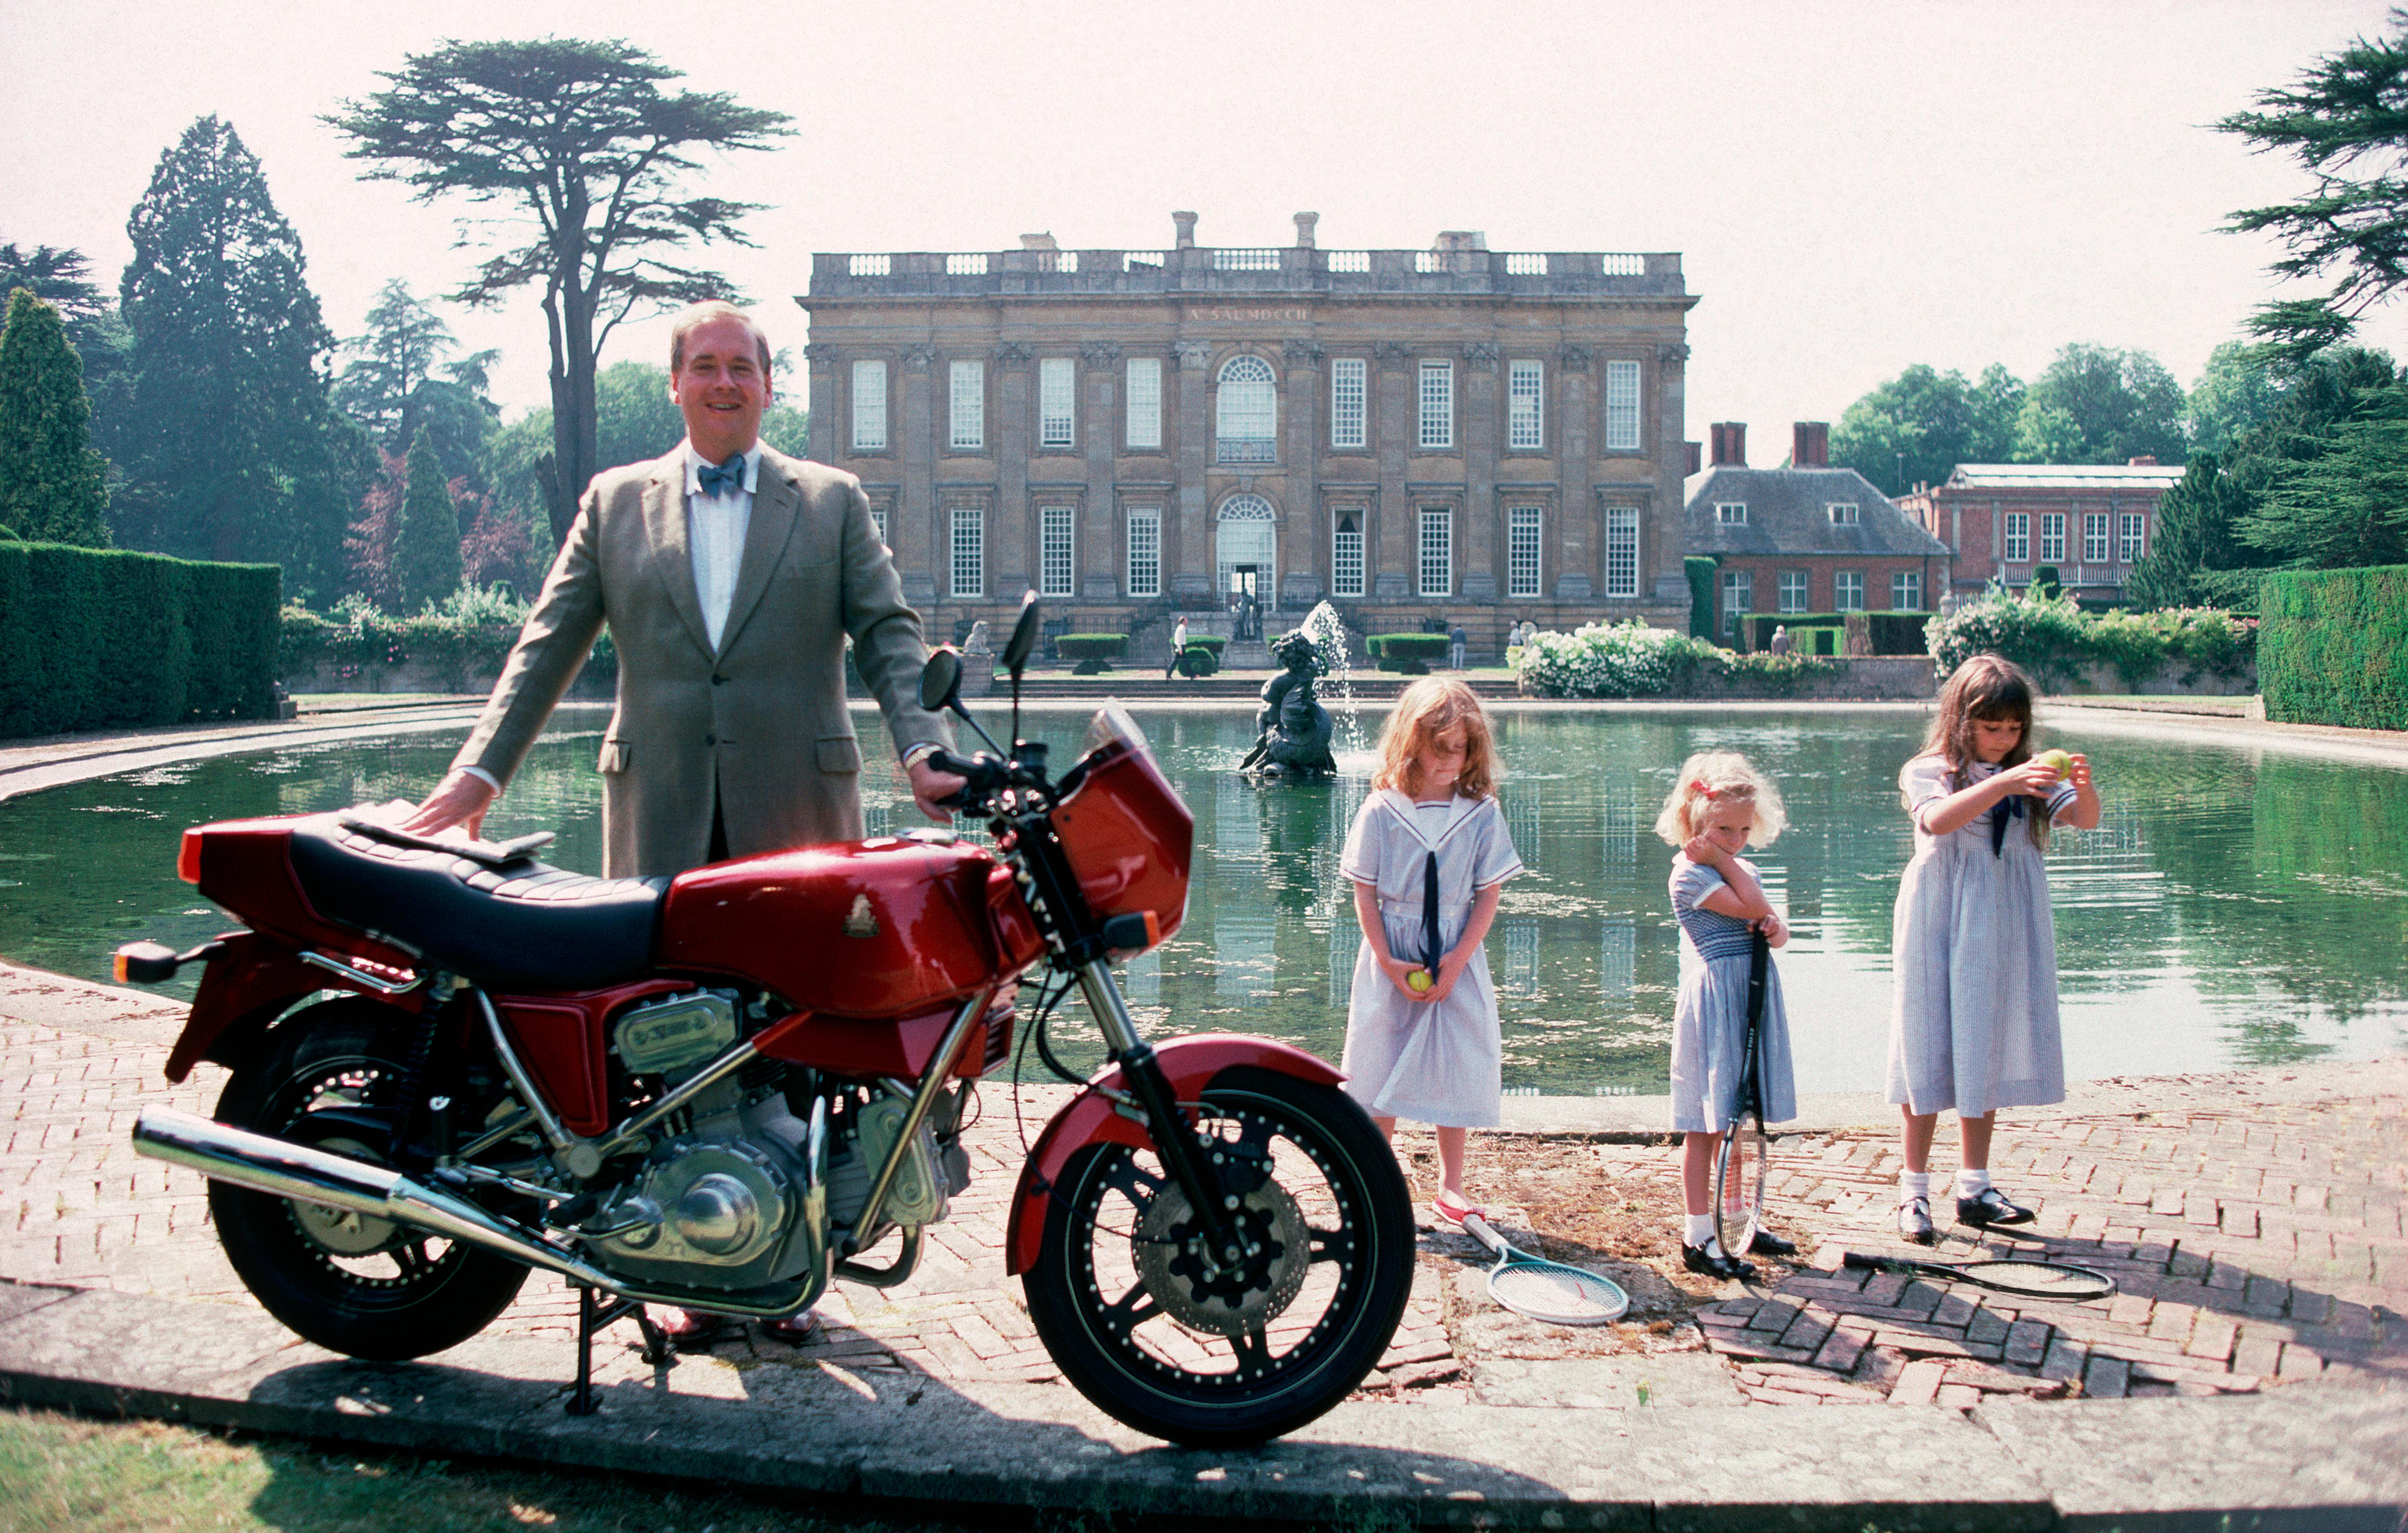 'Motorcycling Lord' 1990 Slim Aarons Limited Estate Edition Print 

Lord Hesketh, Minister of State at the Department of Trade and Industry,  with his motorbike, a Hesketh V1000, by the lake in the grounds of his family estate Easton Neston House,